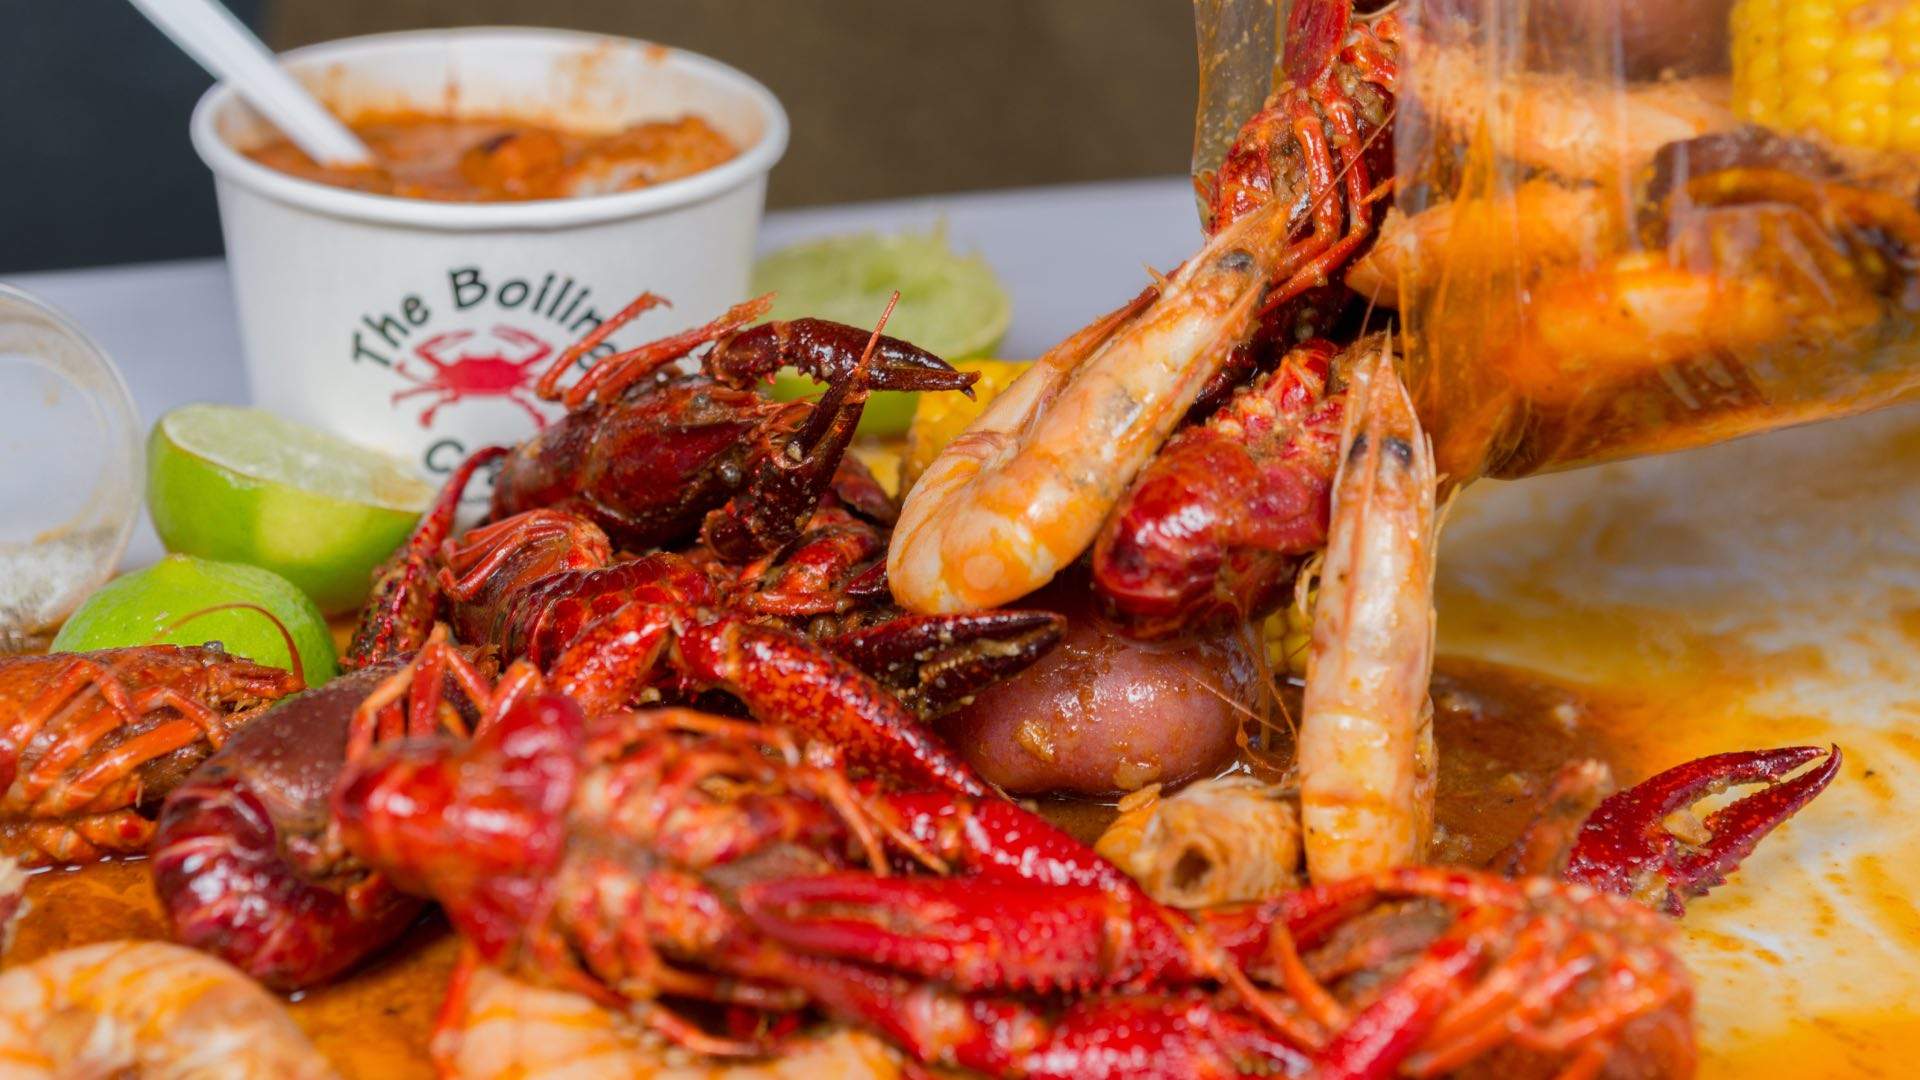 We're Giving Away a $300 Voucher to Spend on a Decadent Seafood Feast at The Boiling Crab